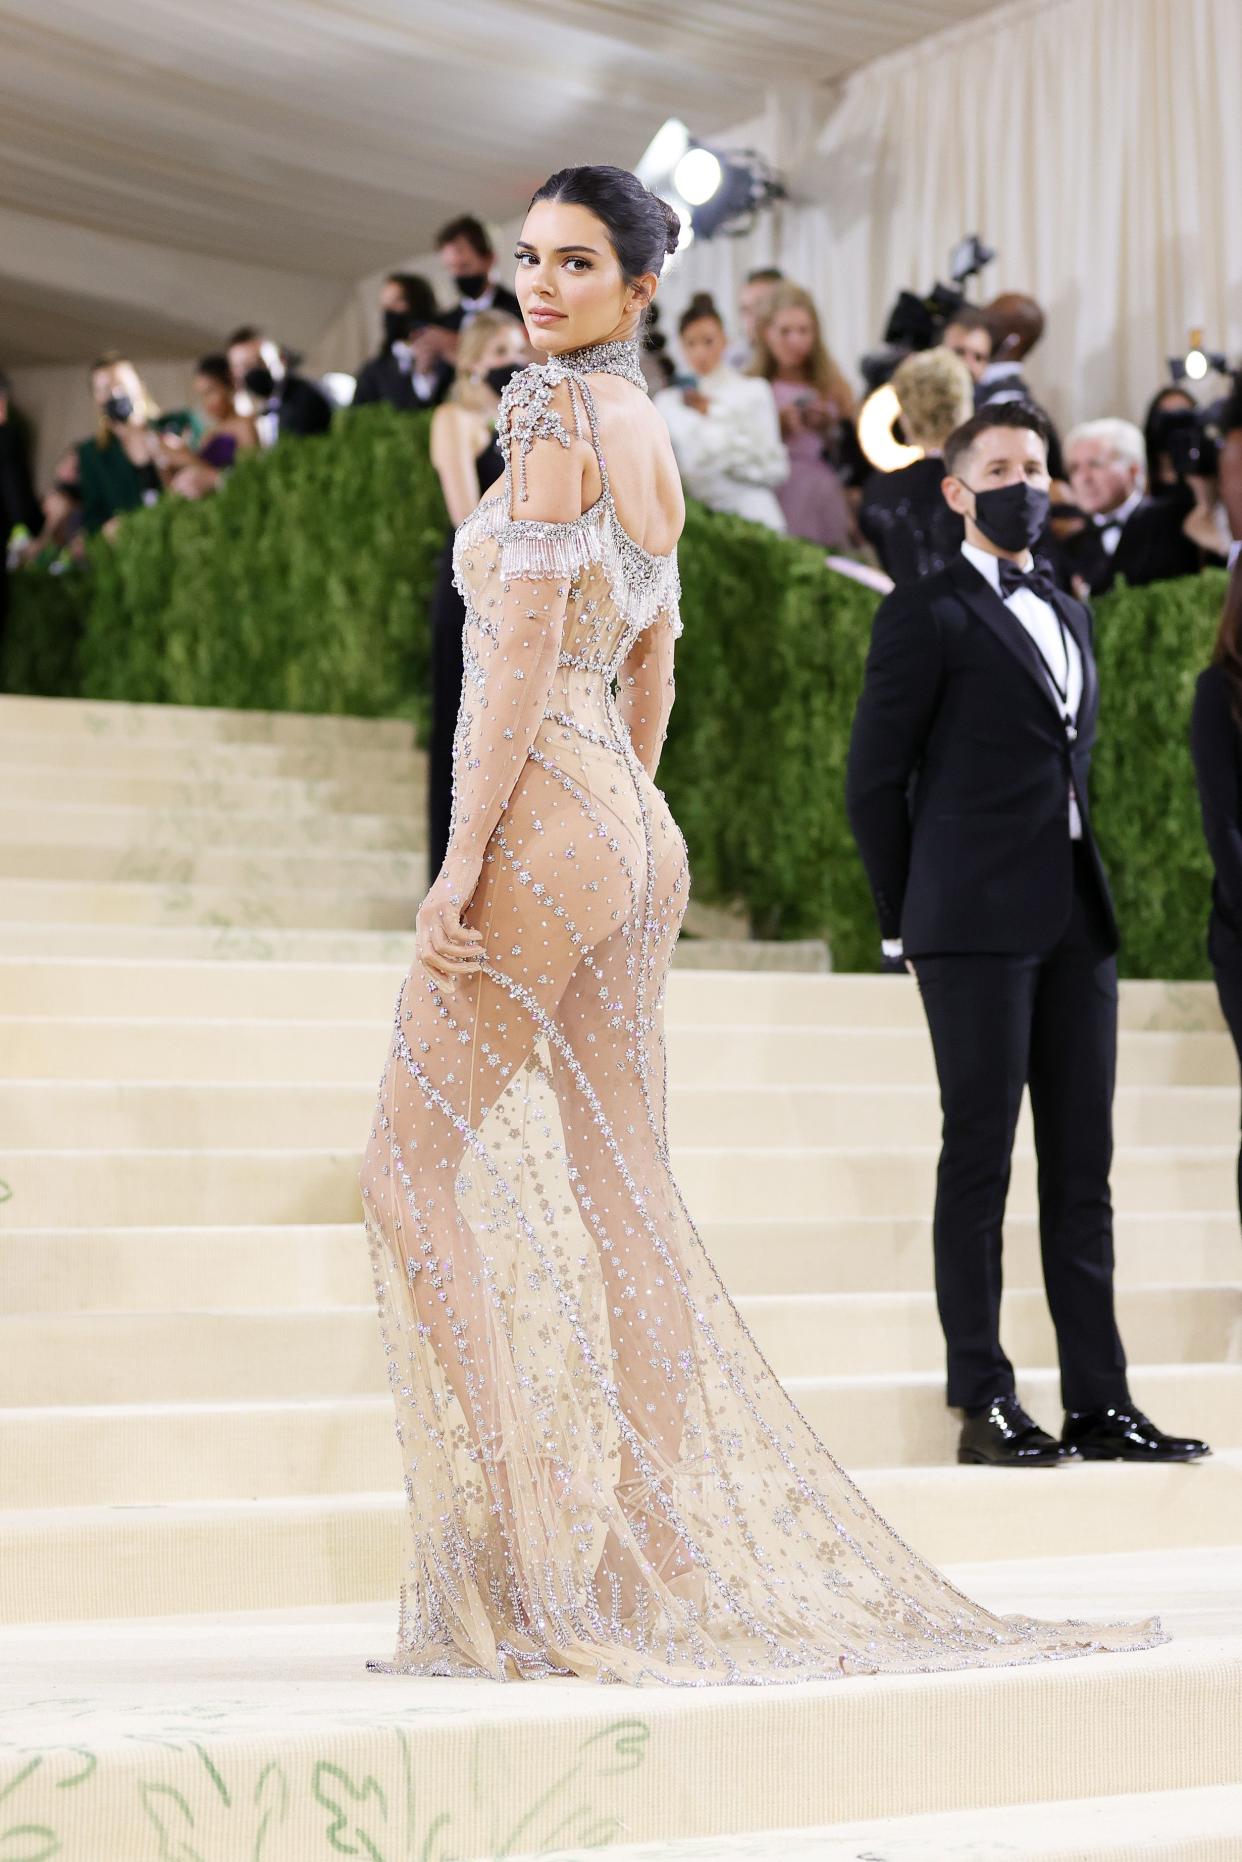 Kendall Jenner attends The 2021 Met Gala Celebrating In America: A Lexicon Of Fashion at Metropolitan Museum of Art on Sept. 13, 2021 in New York.